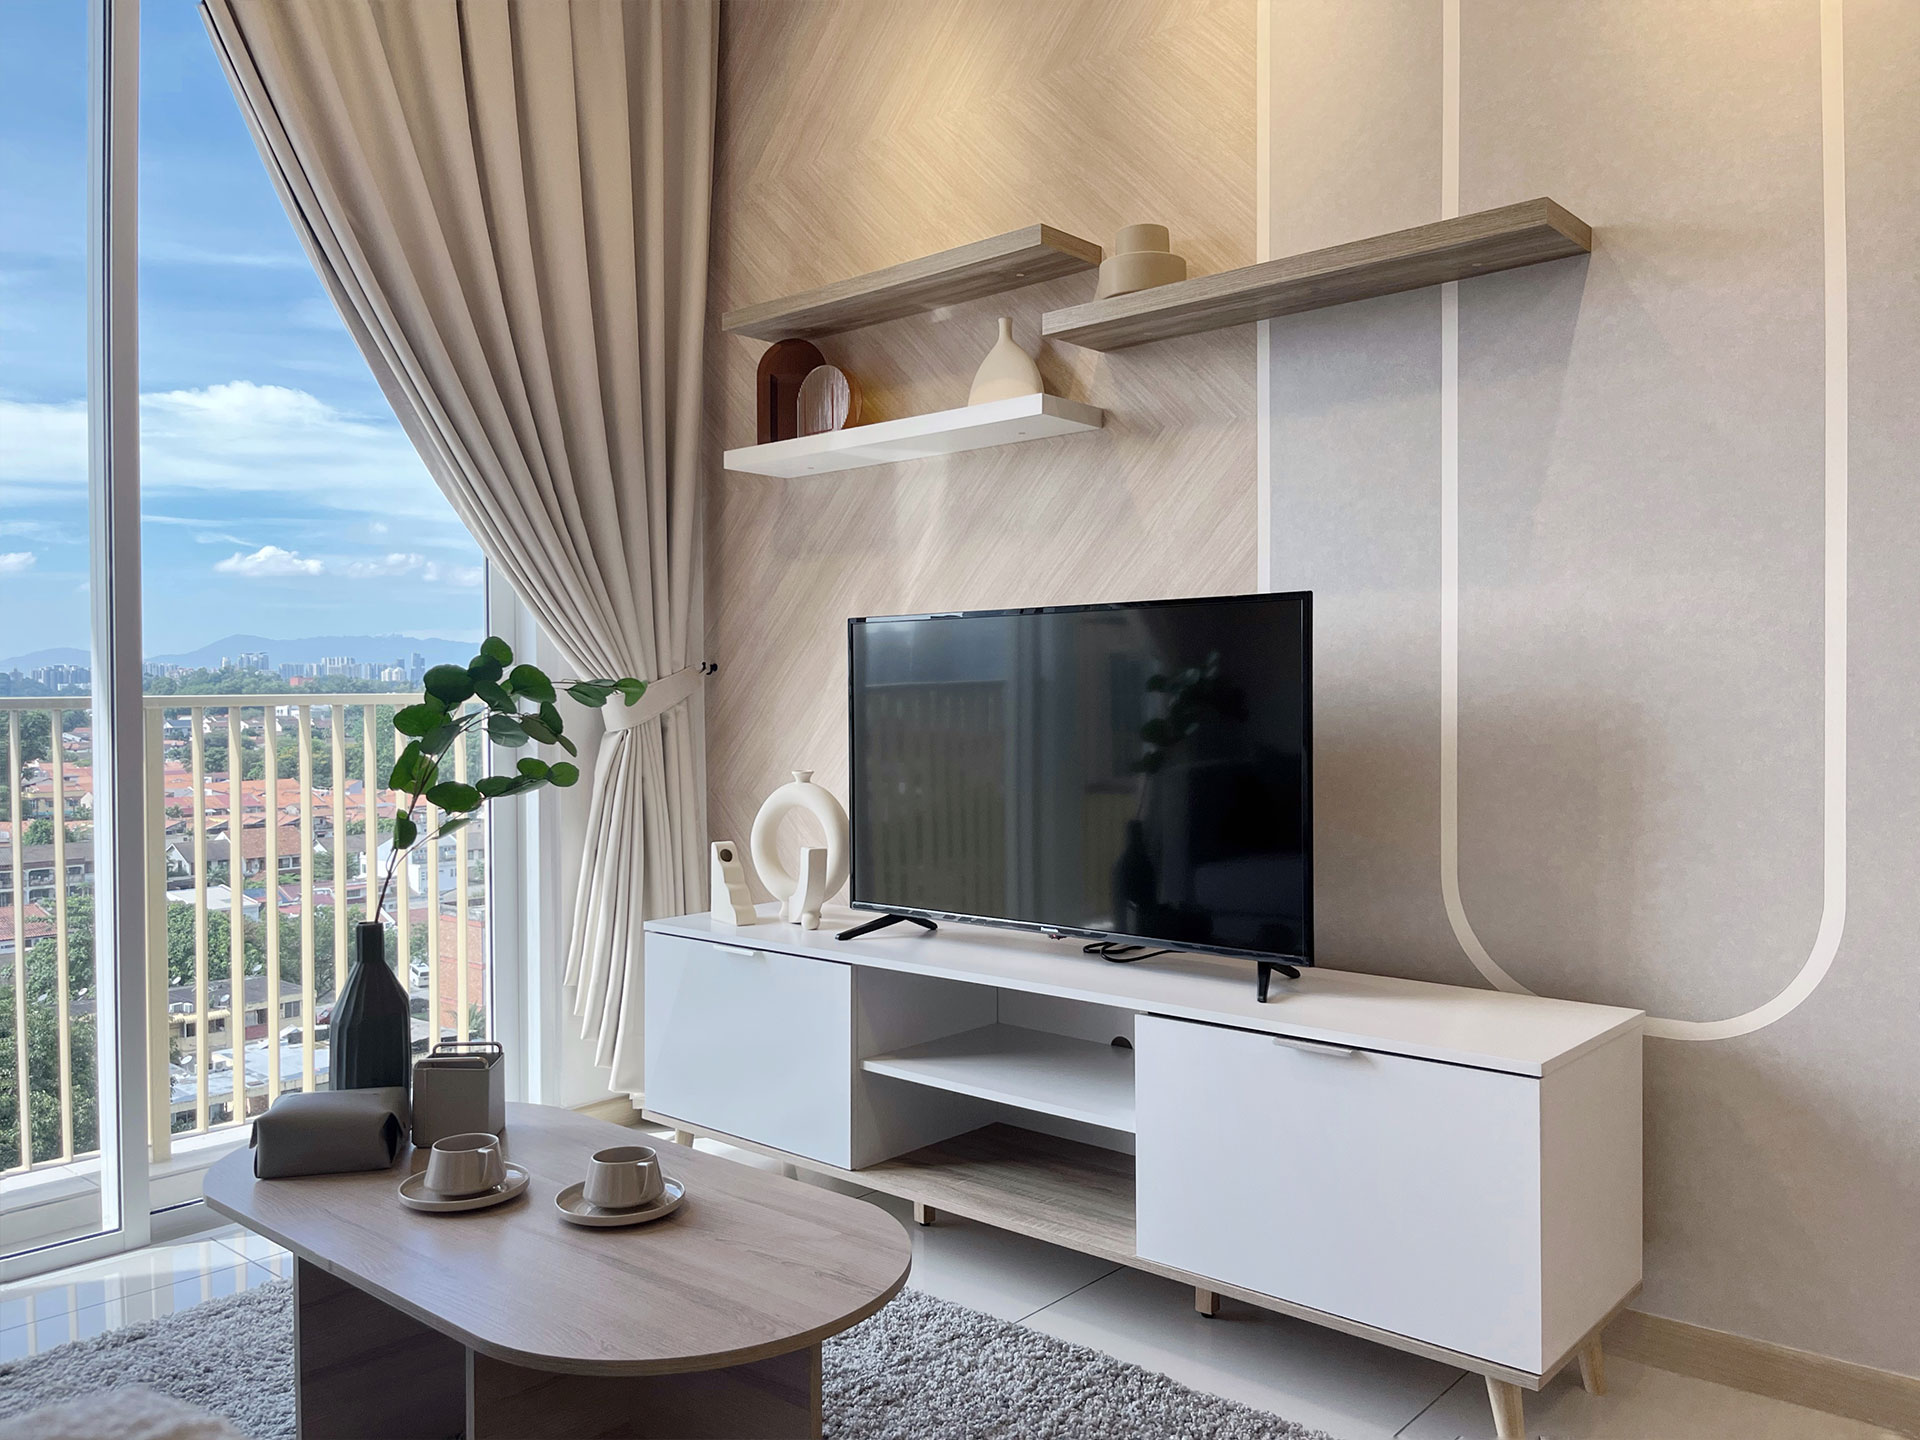 Brown and white suspended shelf with white TV console in Nutmeg Spread theme.